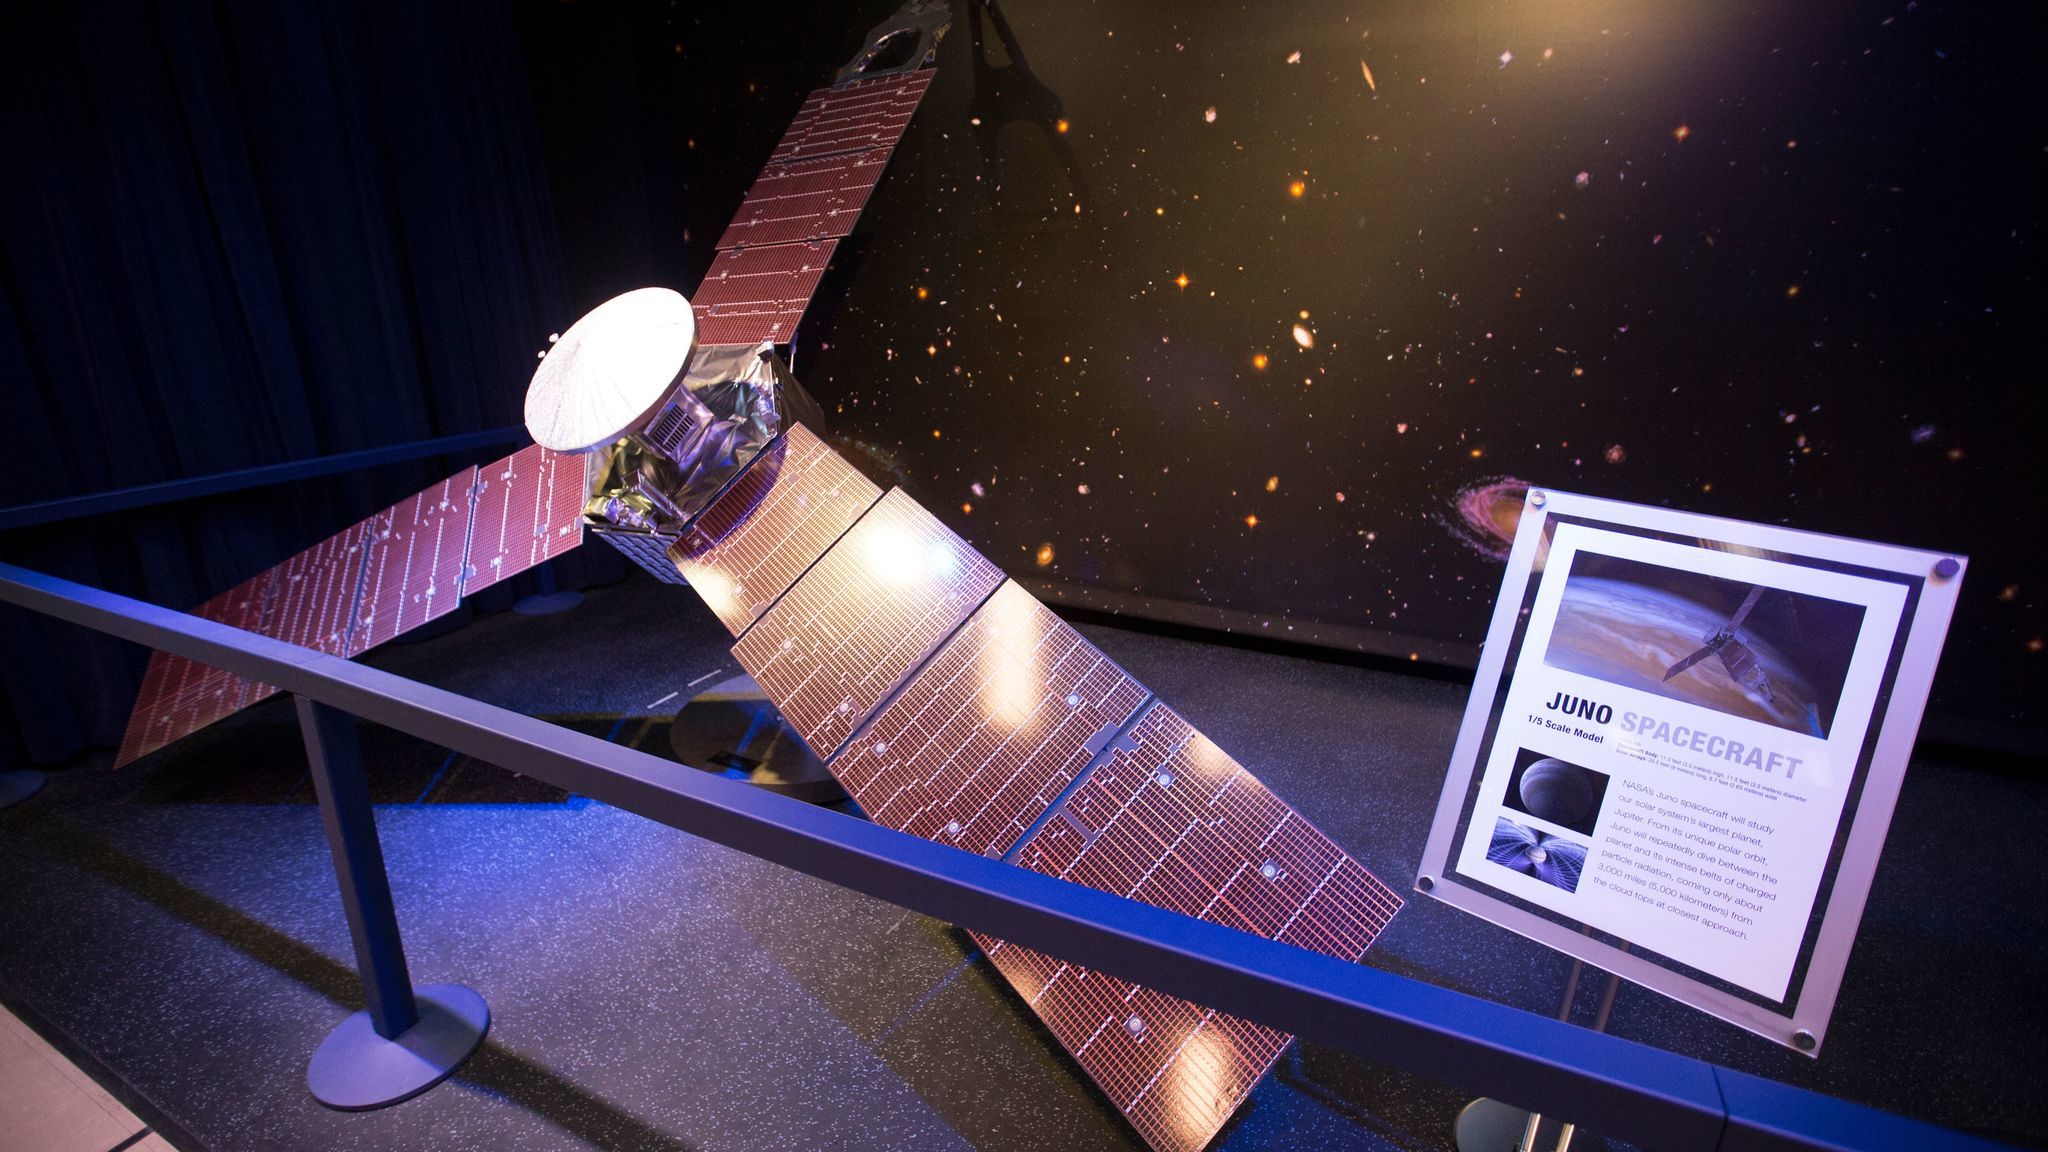 Finley helped design the tones for the Juno spacecraft, a model of which is on display at JPL.